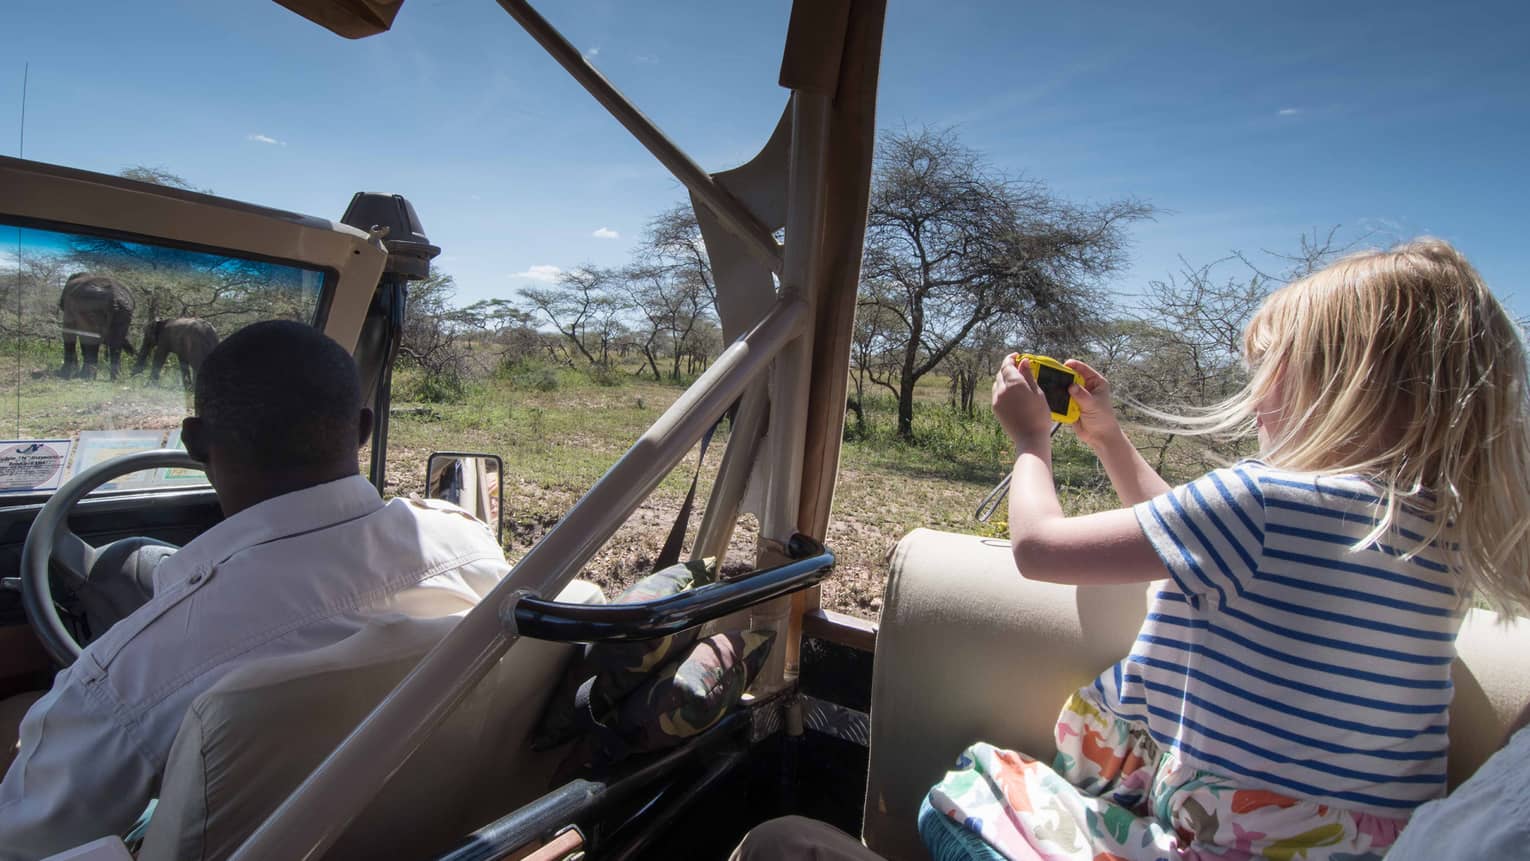 Young girl takes photos of elephants from backseat of safari Jeep